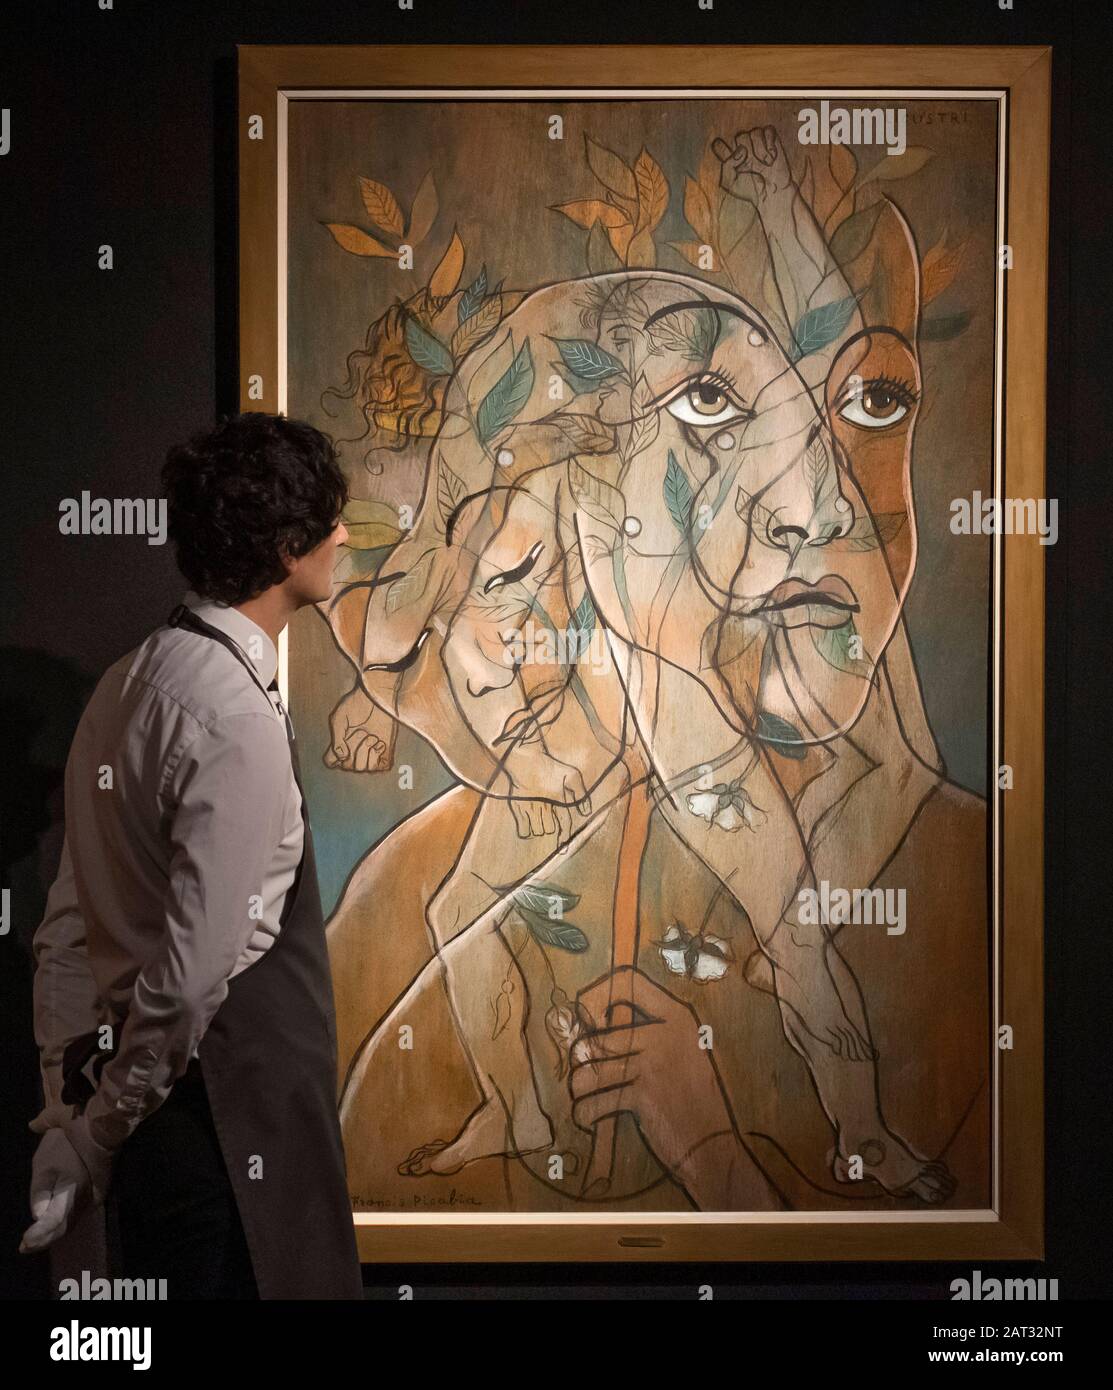 Christie’s, London, UK. 30th January 2020. Impressionist, Modern & Surreal Art preview from ‘20th Century at Christie’s’ sales taking place on 5 February 2020. Image: Francis Picabia. Ligustri, 1929. Estimate £2,200,000-2,800,000. Credit: Malcolm Park/Alamy Live News. Stock Photo